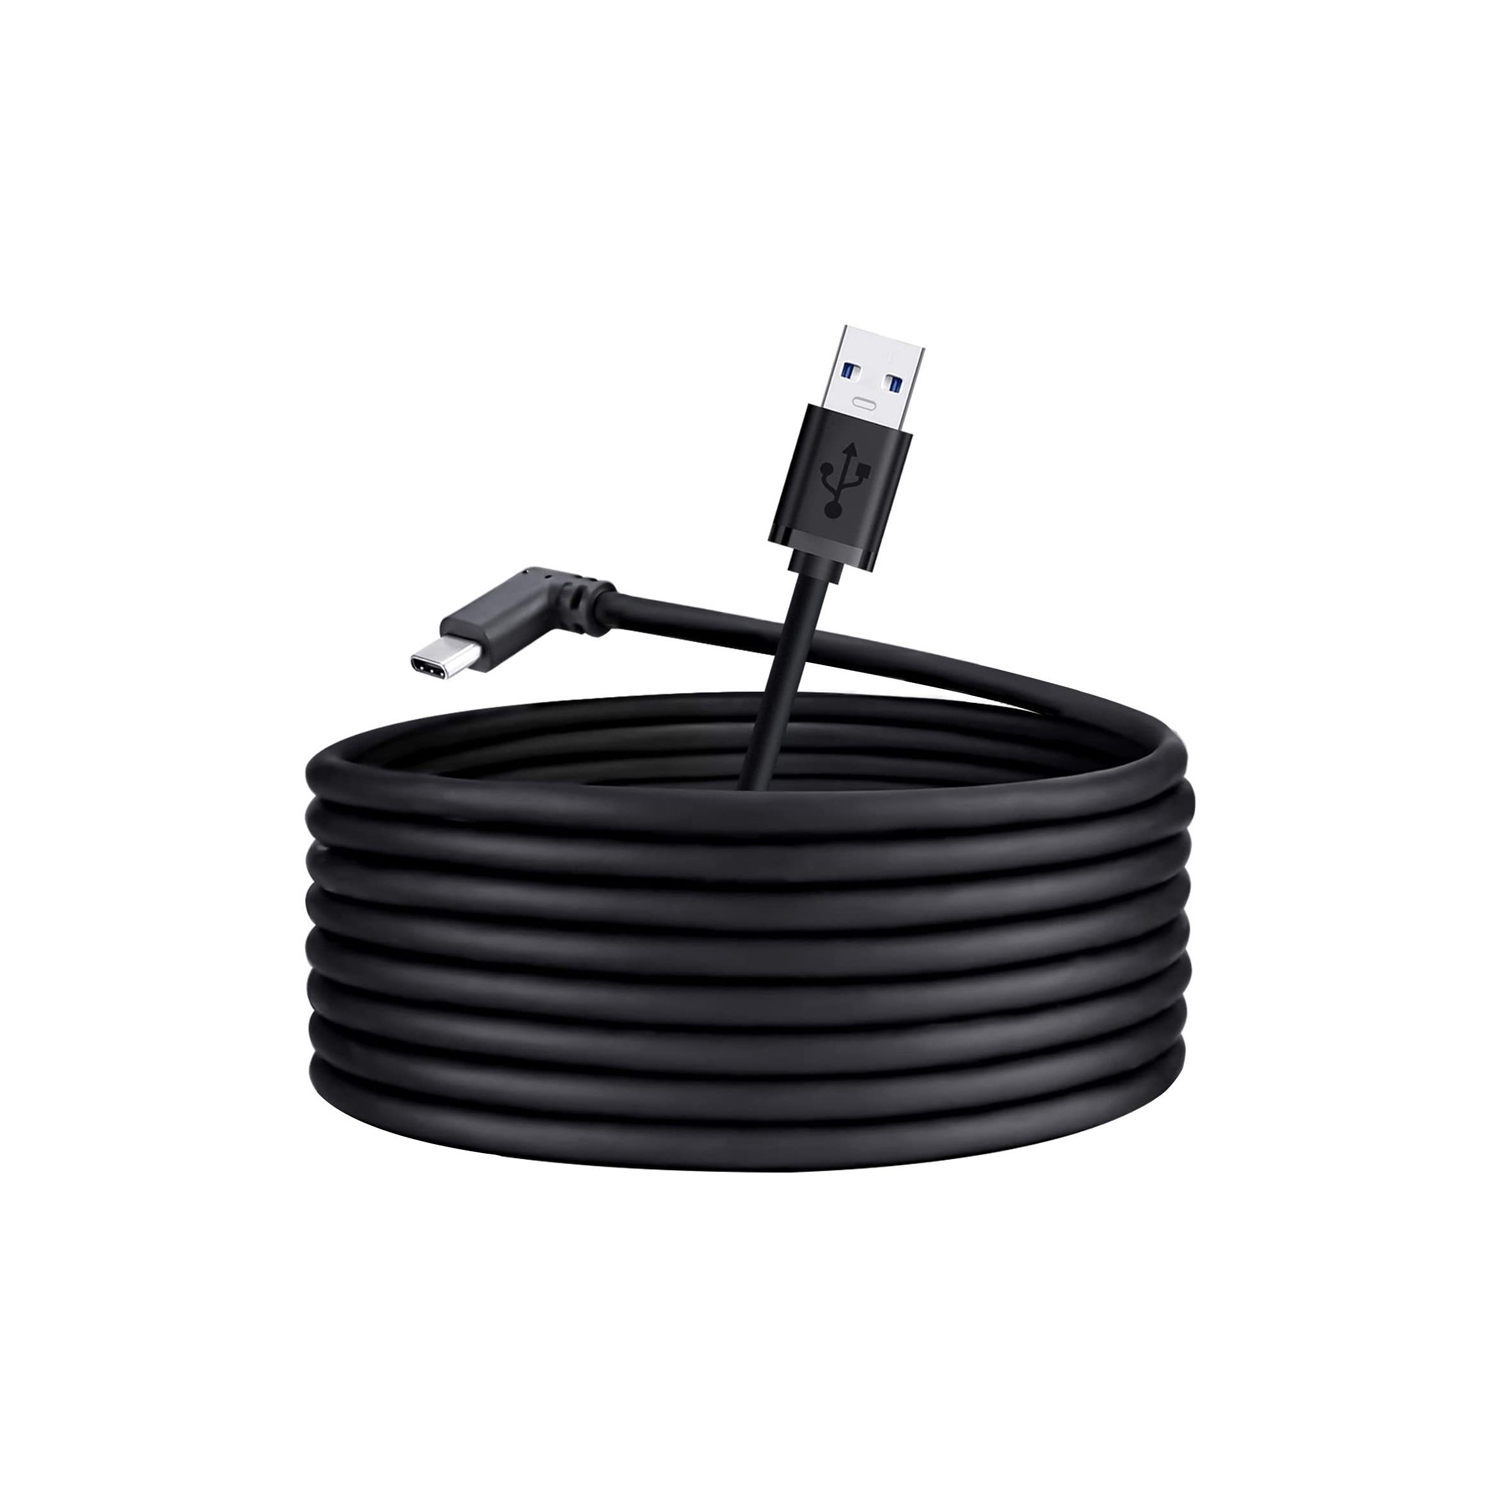 Link Cable for Oculus Quest 1/2 USB Type C 10 Feet USB 3.2 - axGear